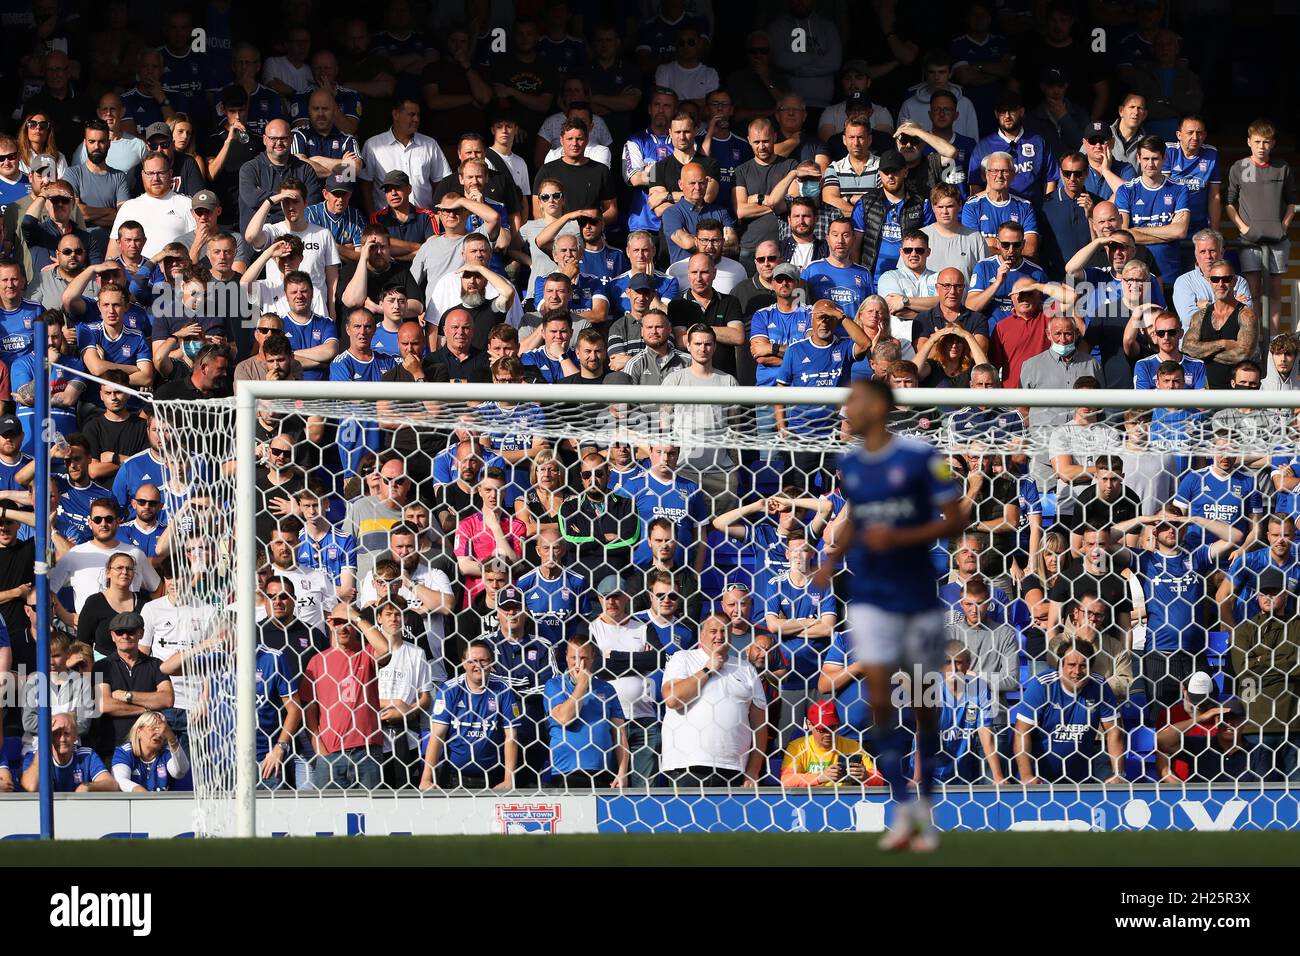 Ipswich Town fans look on in the setting sun - Ipswich Town v Sheffield Wednesday, Sky Bet League One, Portman Road, Ipswich, UK - 25th September 2021  Editorial Use Only - DataCo restrictions apply Stock Photo